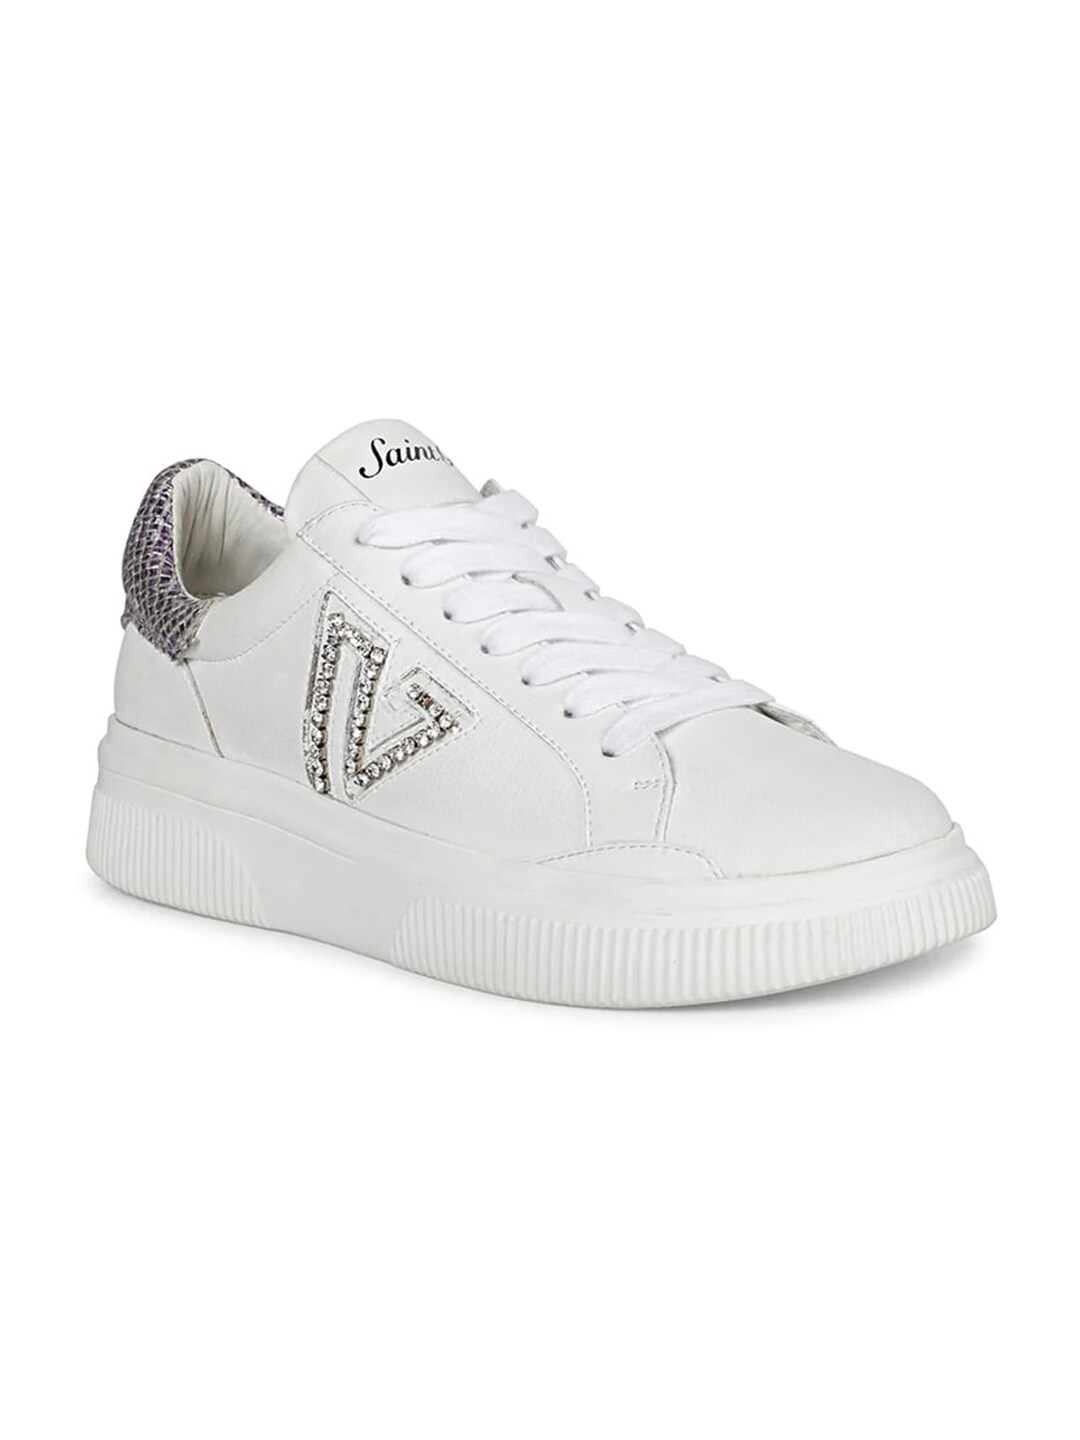 Saint G Women Printed Leather Sneakers Price in India